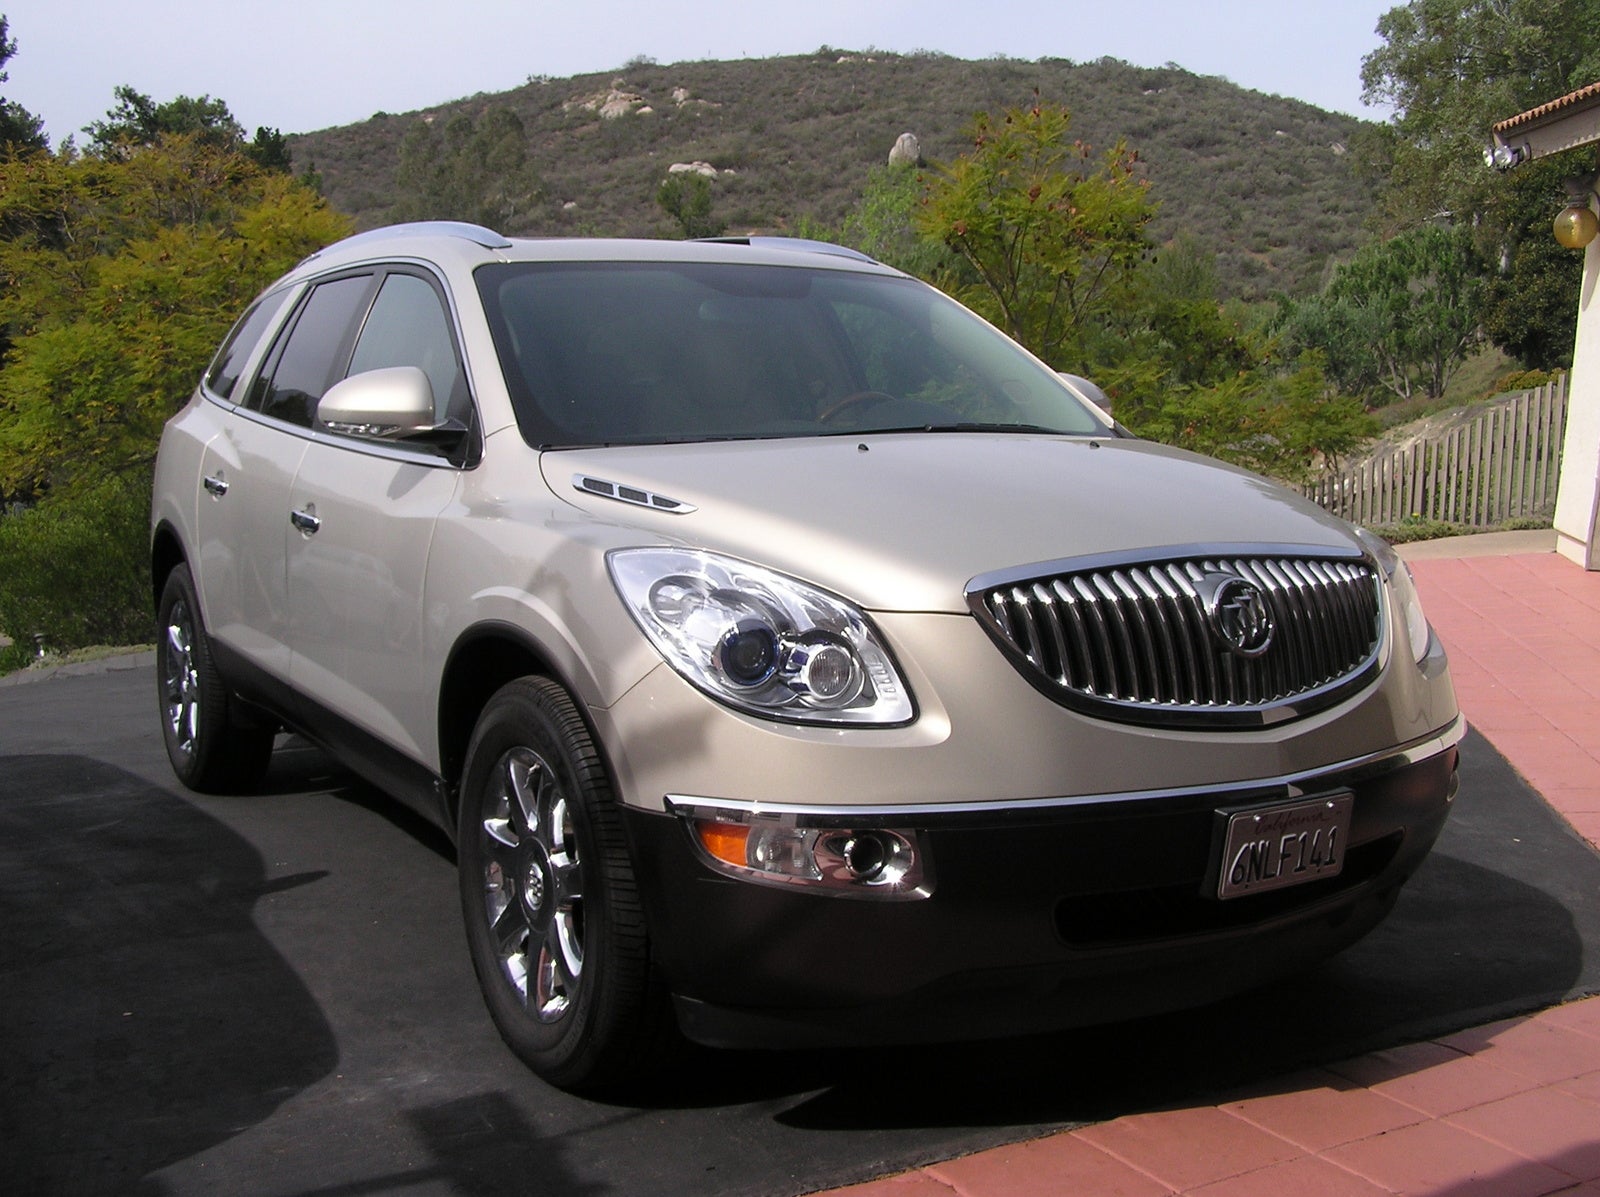 Buick enclave pros and cons